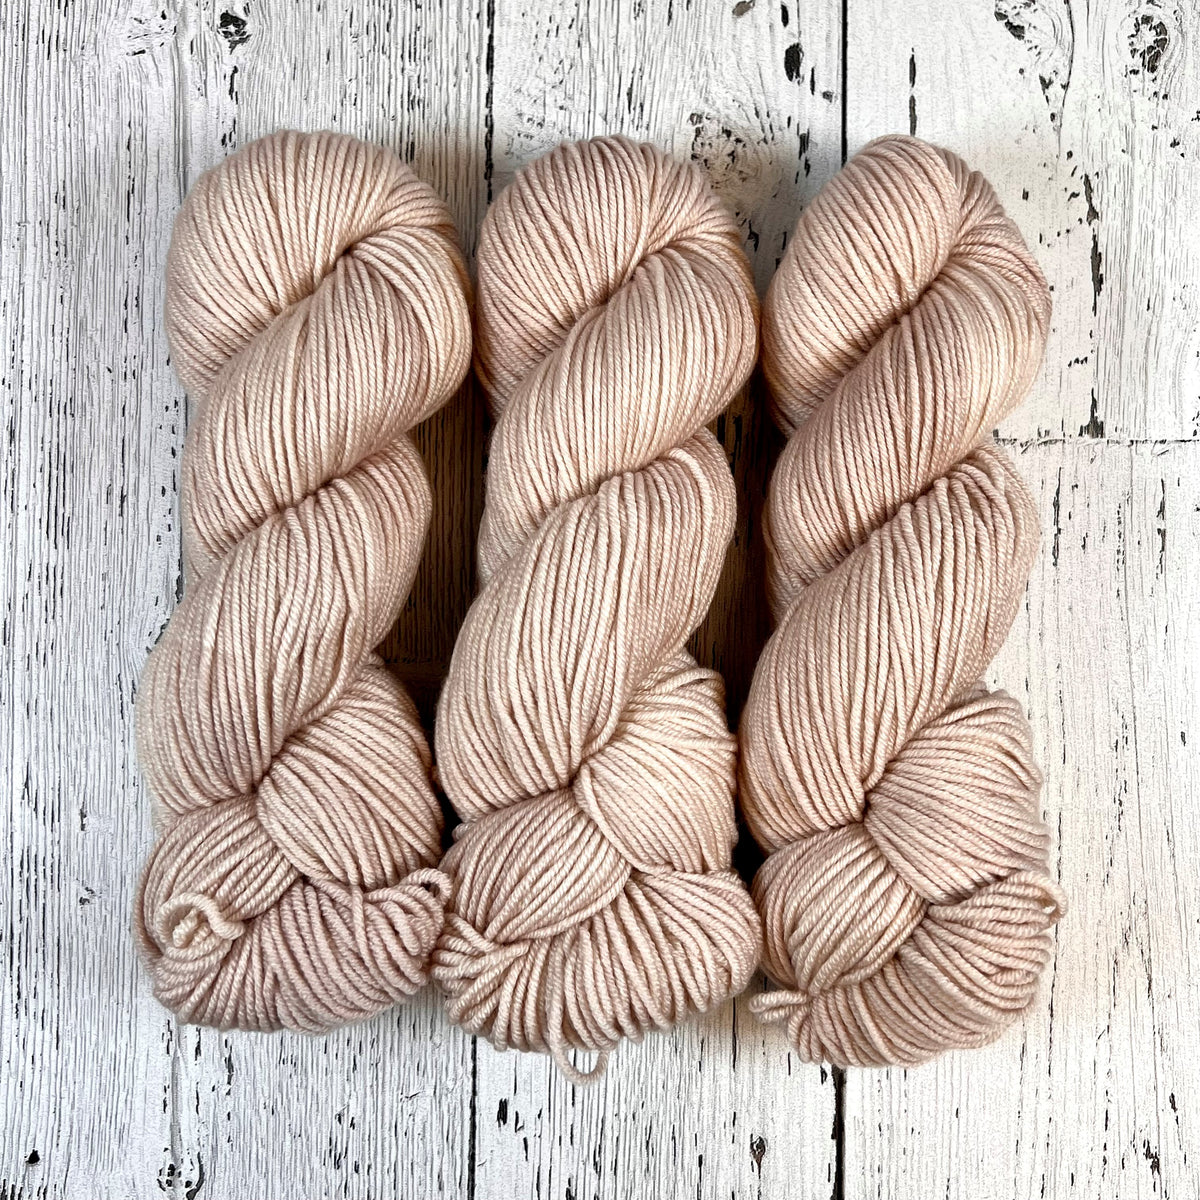 Champagne - Fioritura Worsted - Dyed Stock